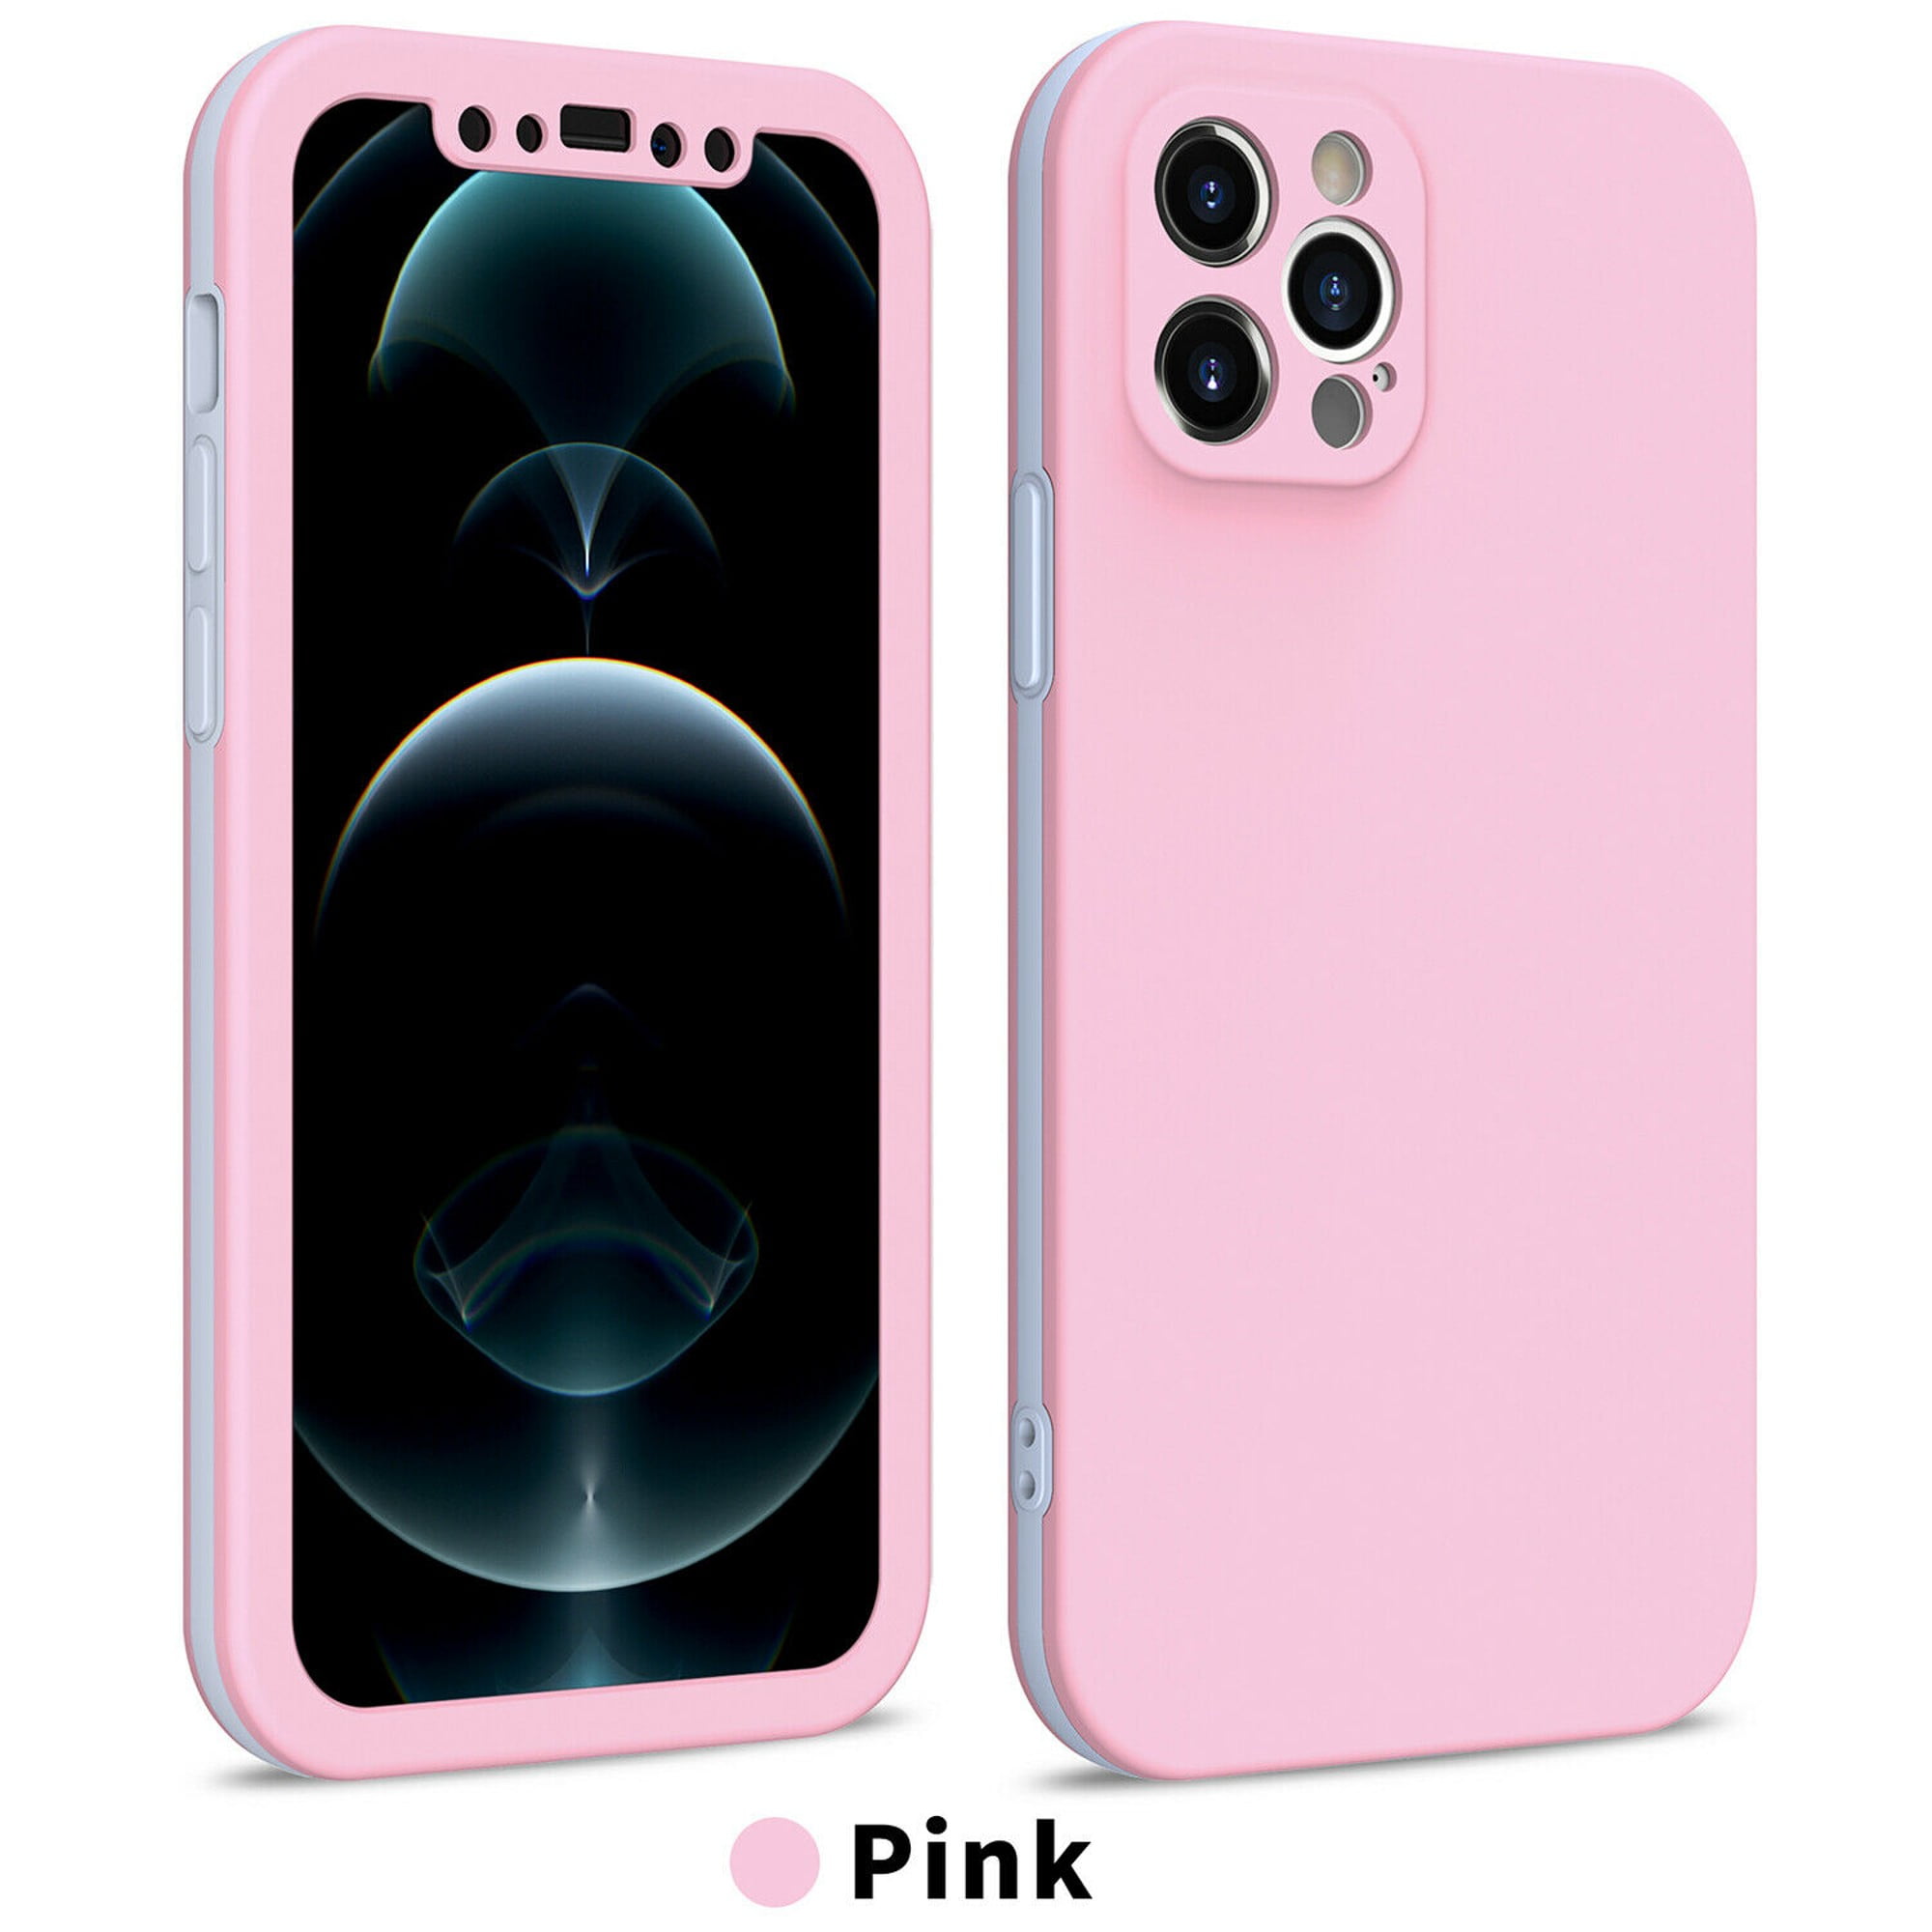 Hybrid Dual Layer iPhone XS Case (Pink) Camera Lens Protection 360